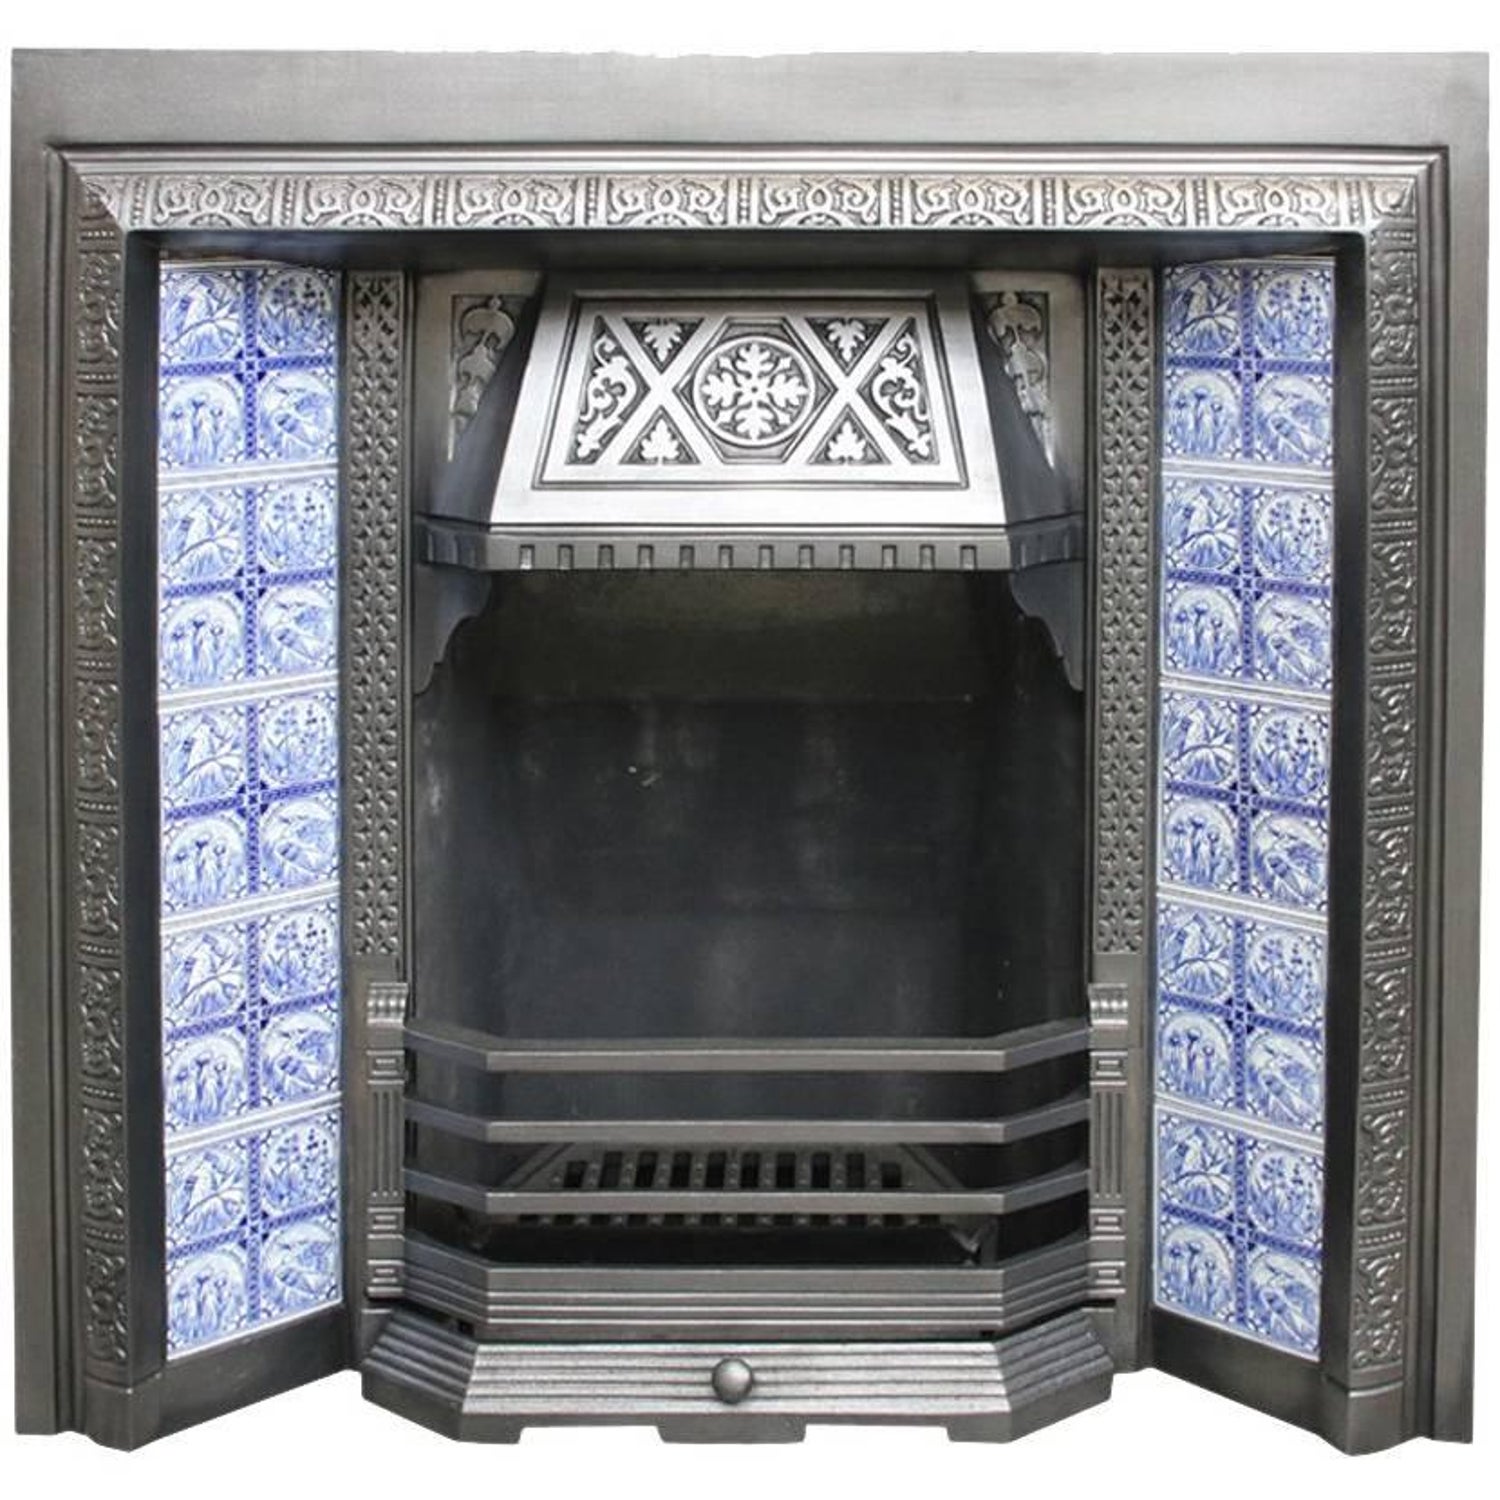 Tile Surround Fireplace Fresh Restored Antique Aesthetic Cast Iron Fireplace Insert